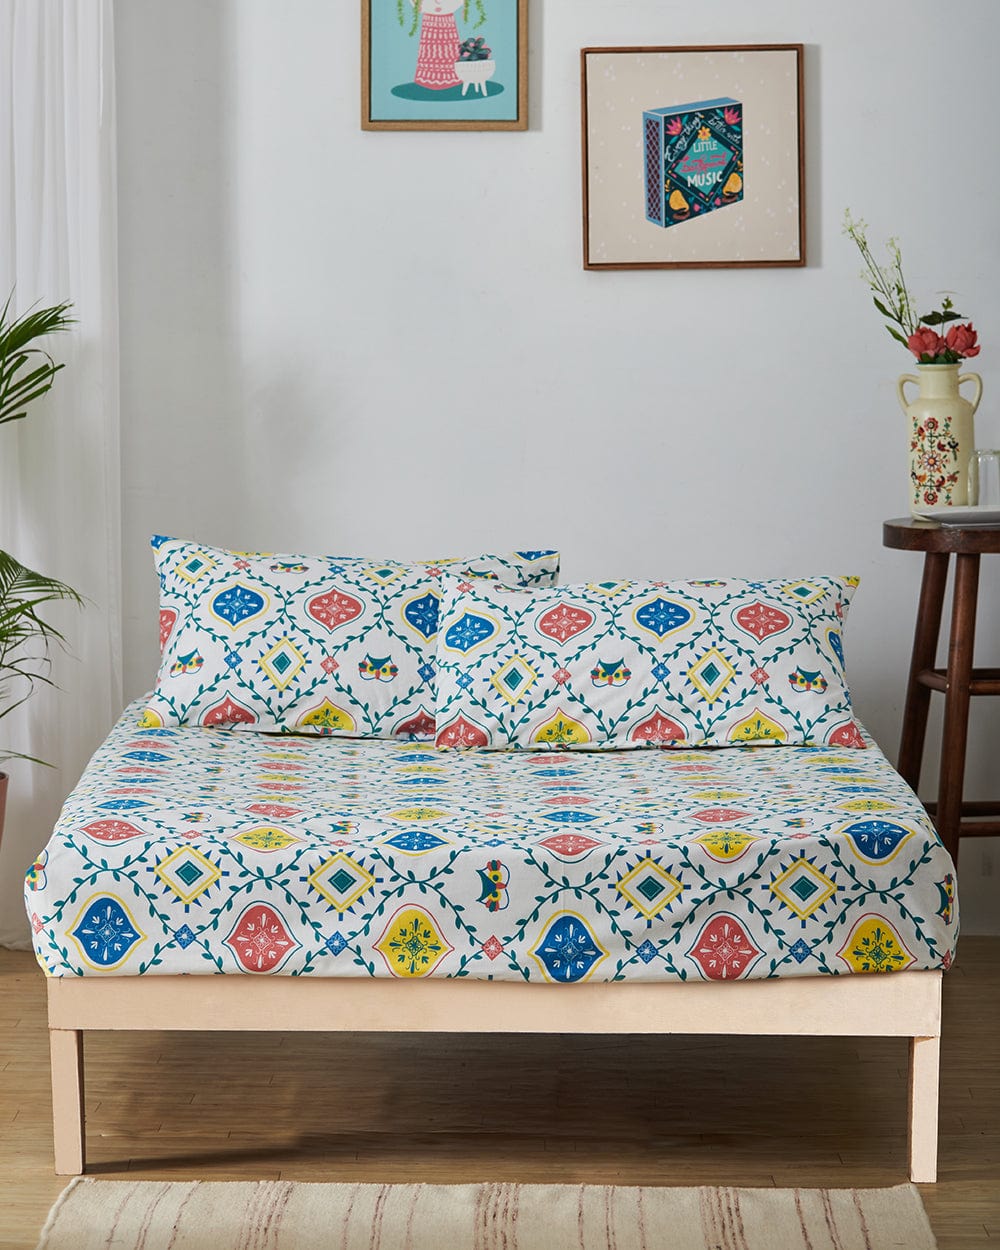 TEAL by Chumbak Arctic Owl Bedsheet - Queen size, 136TC at ₹ 795